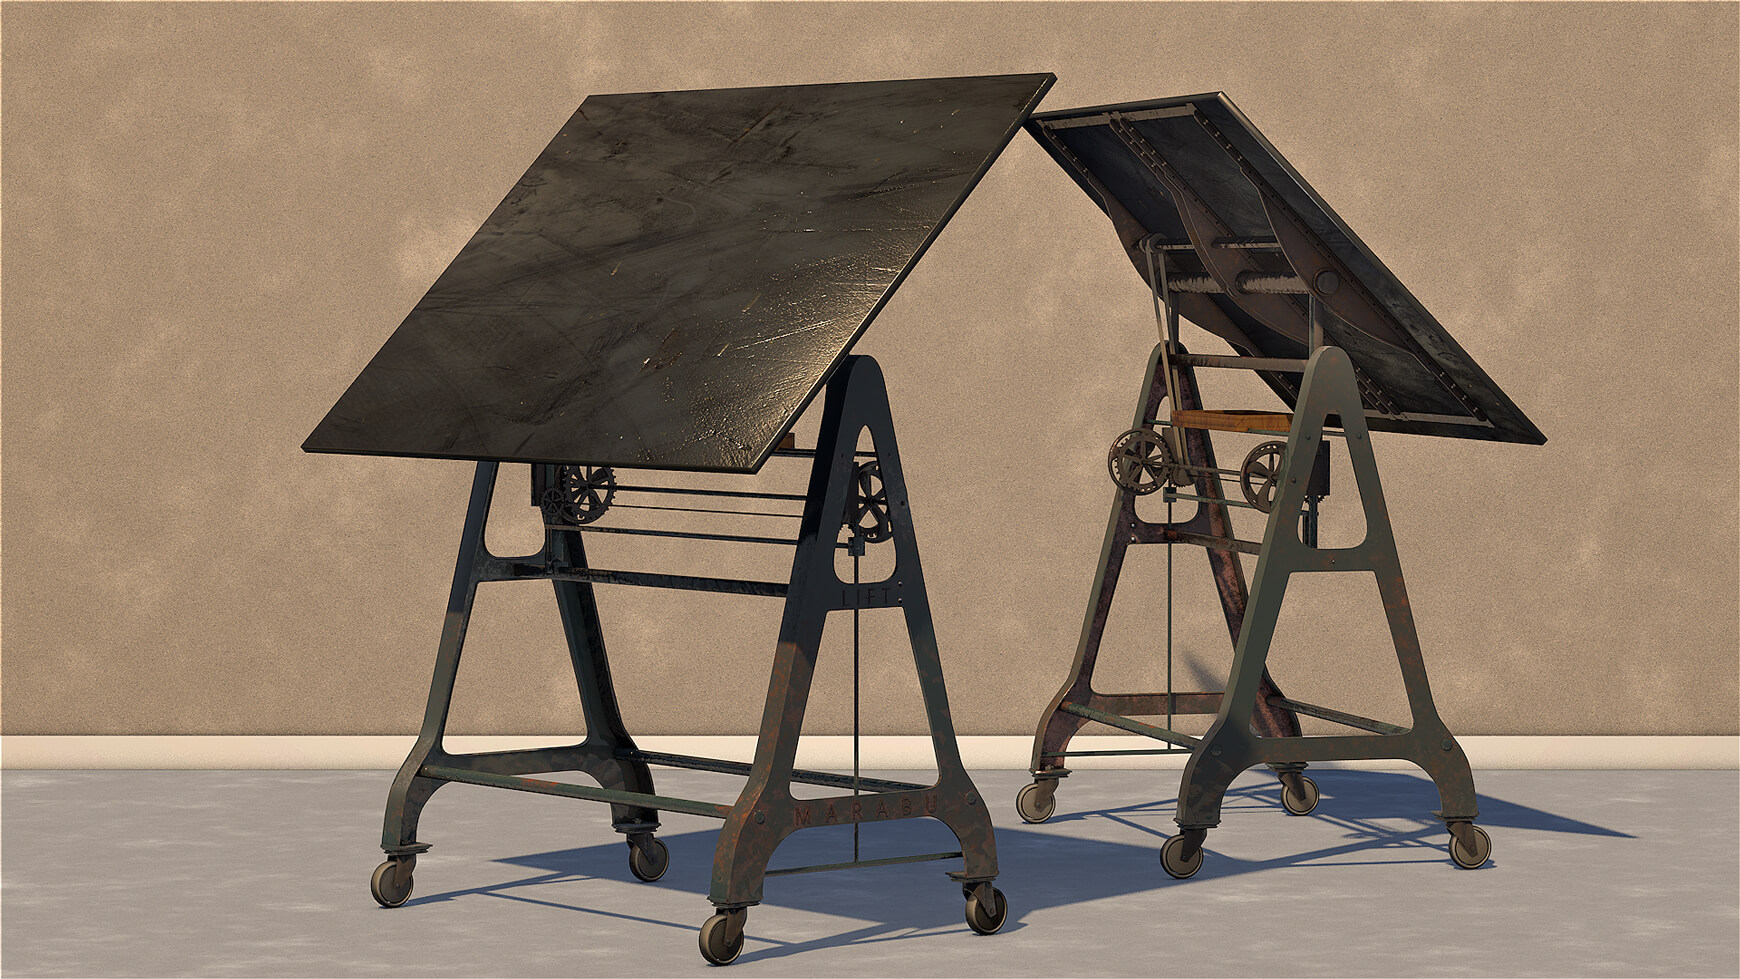 Free Cinema 4d 3d Model Architectural Drafting Board The Pixel Lab